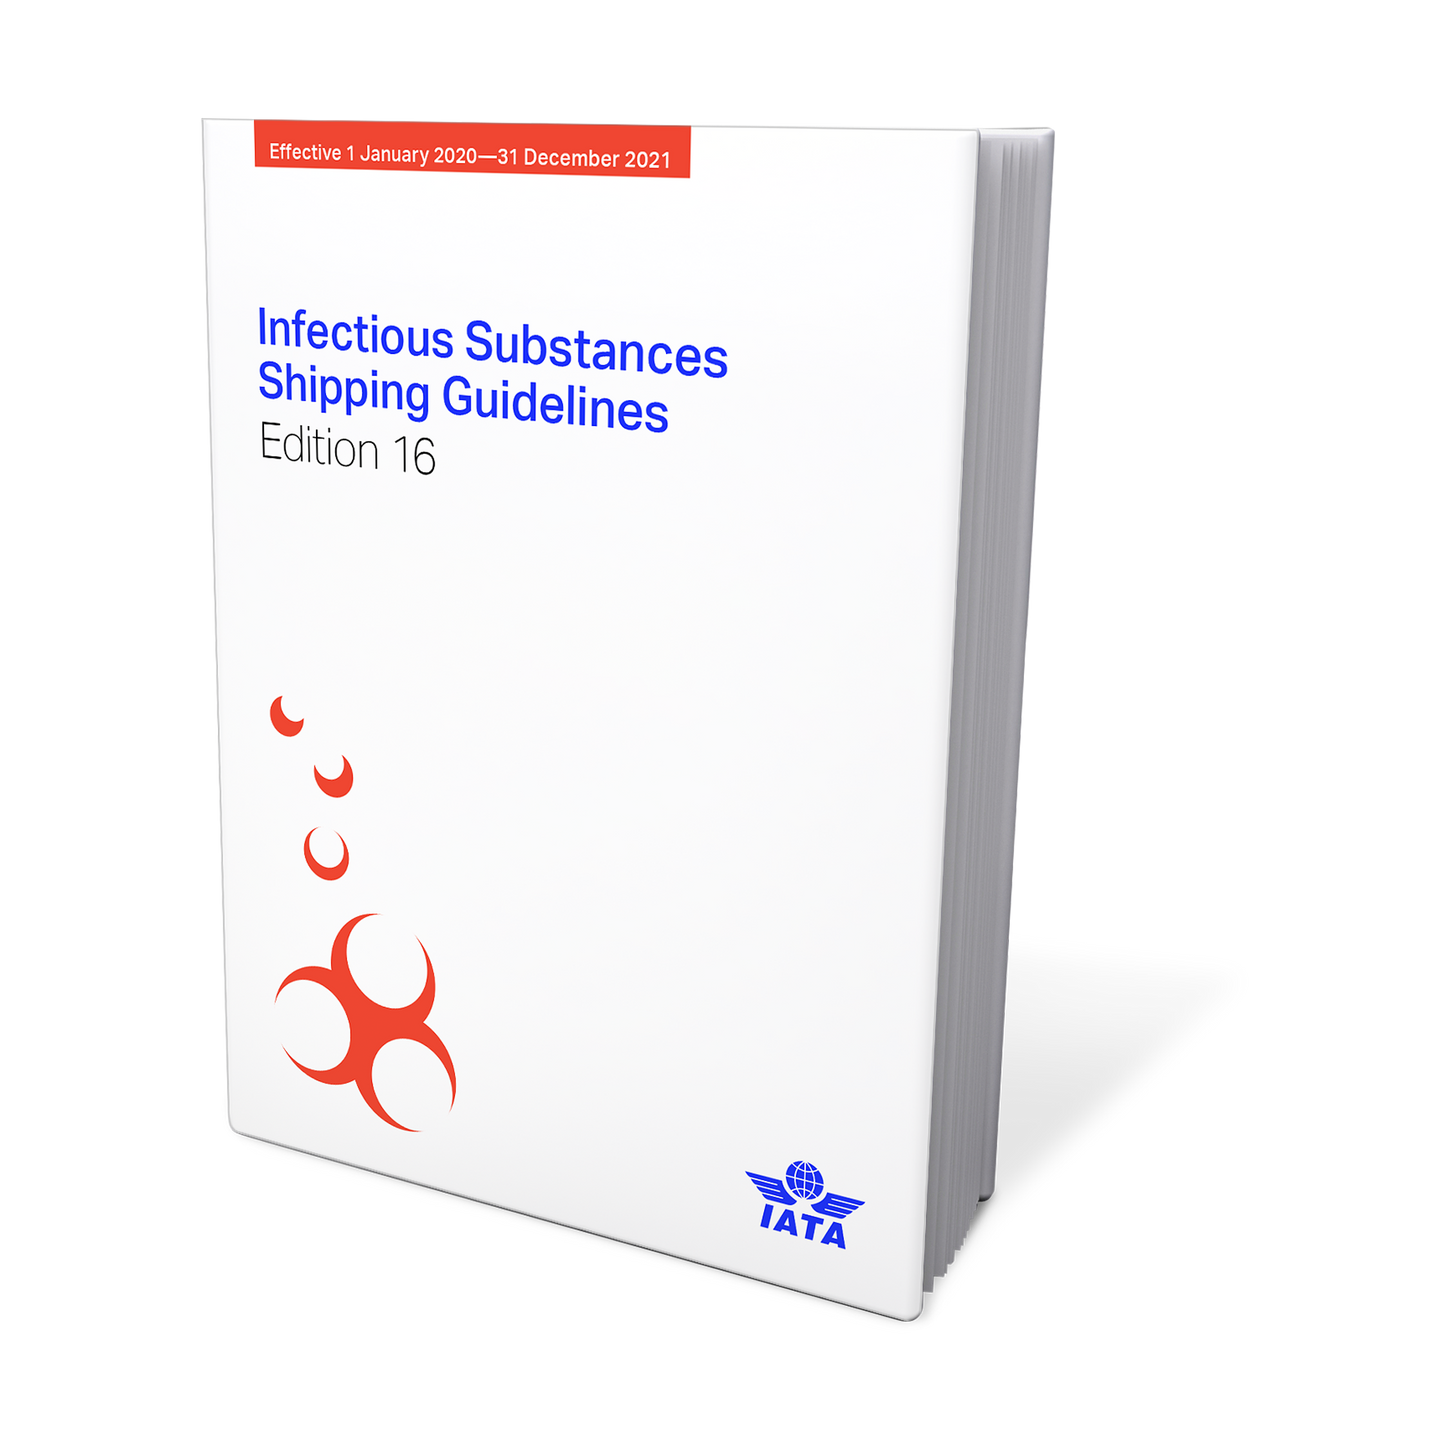 IATA - 2021 INFECTIOUS SUBSTANCE SHIPPING GUIDELINES